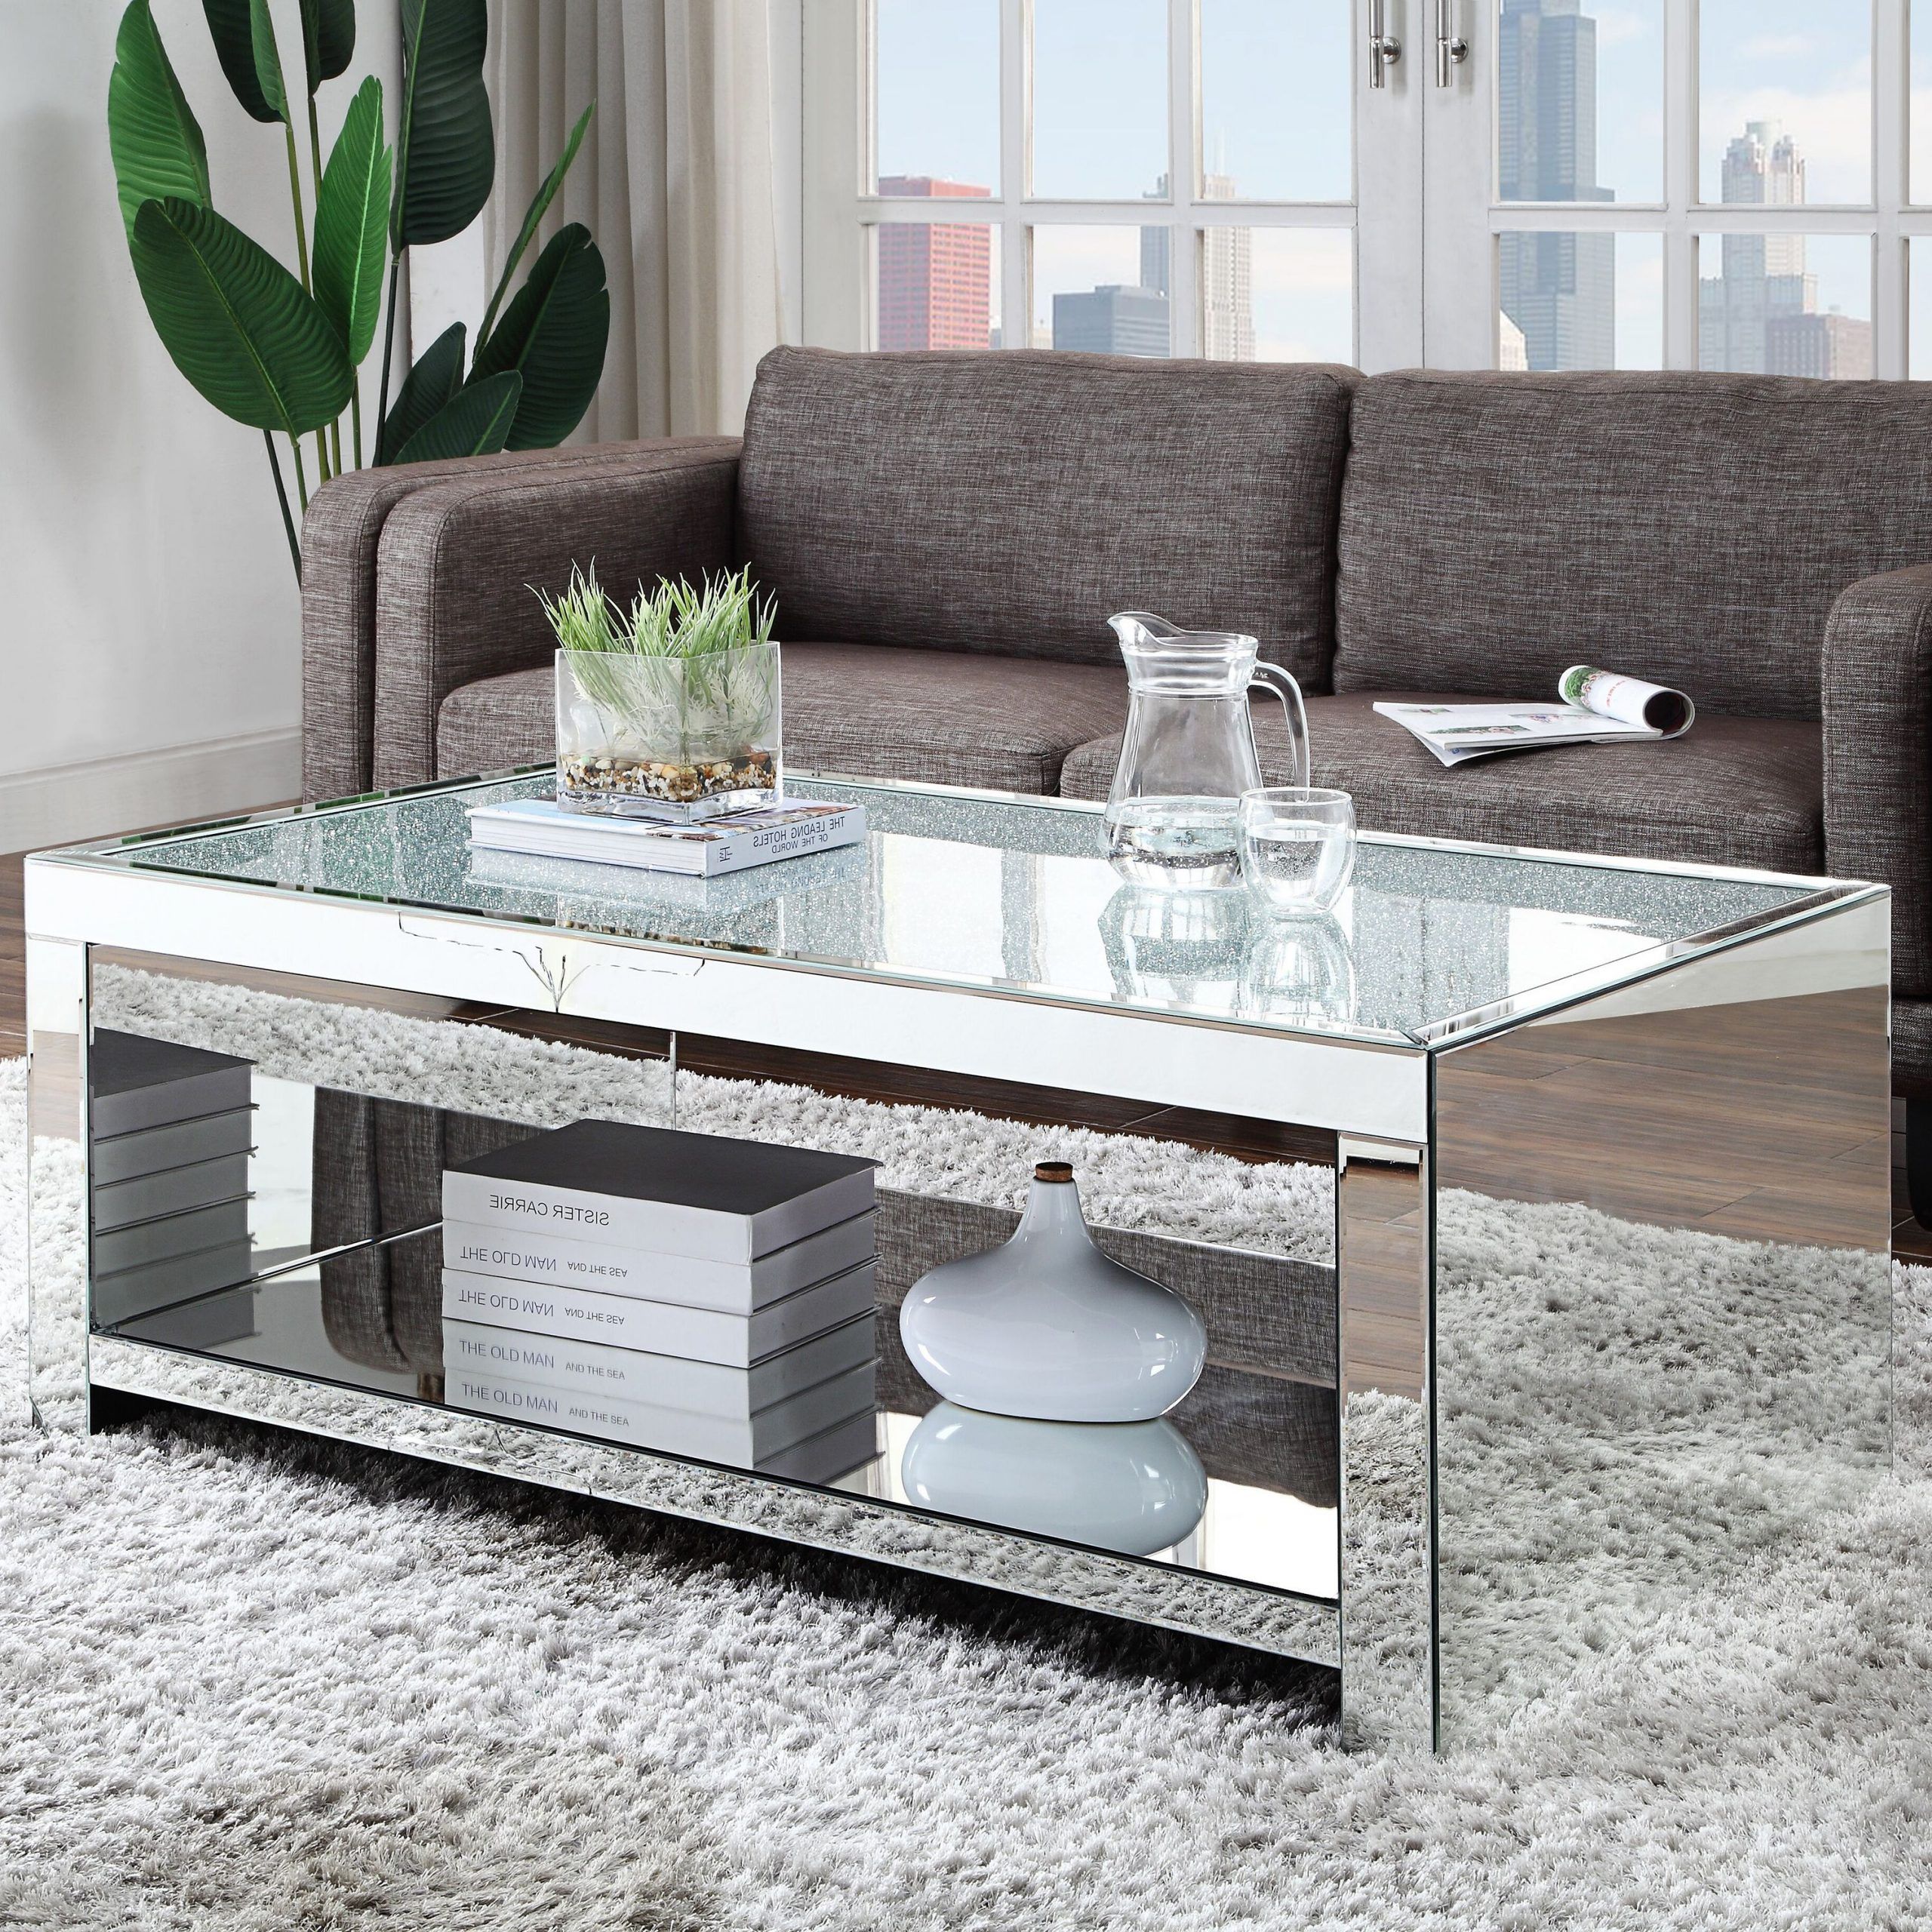 Coffee Table Regarding Latest Mirrored Coffee Tables (View 6 of 10)